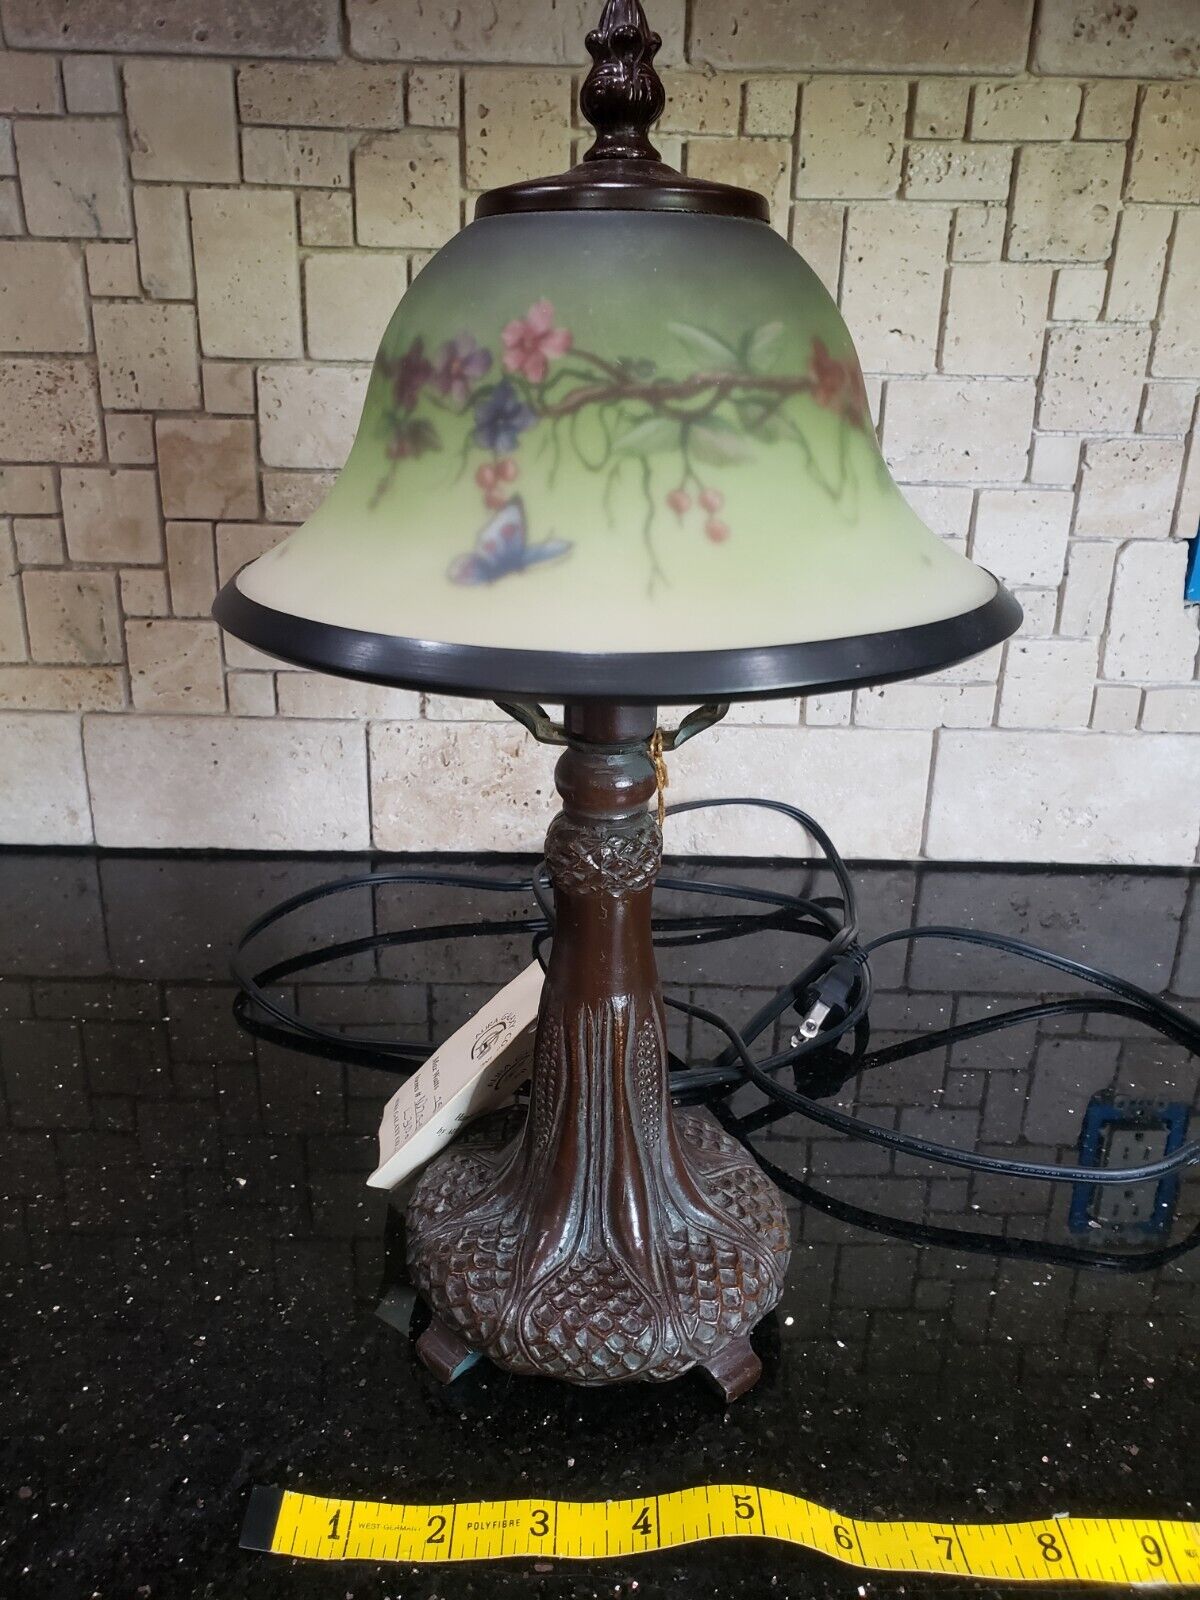 Antique Vintage Hand Painted Flower Butterfly Lamp, Aura Galaxy Co Inc. Handel 